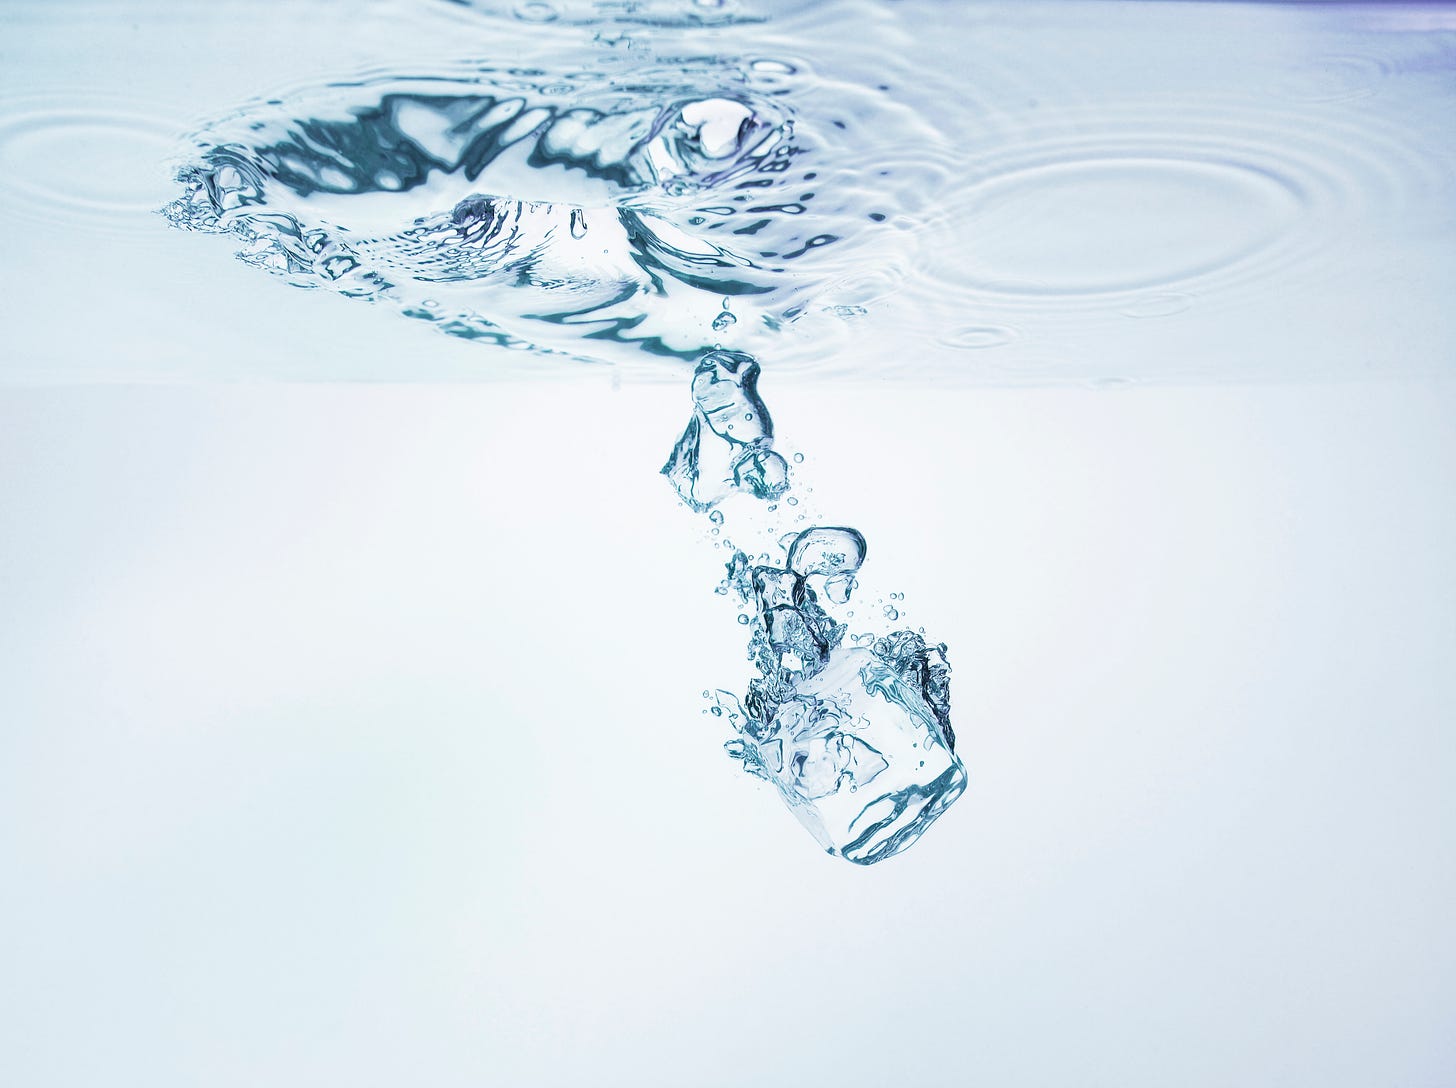 An ice cube falling into clear liquid, probably water